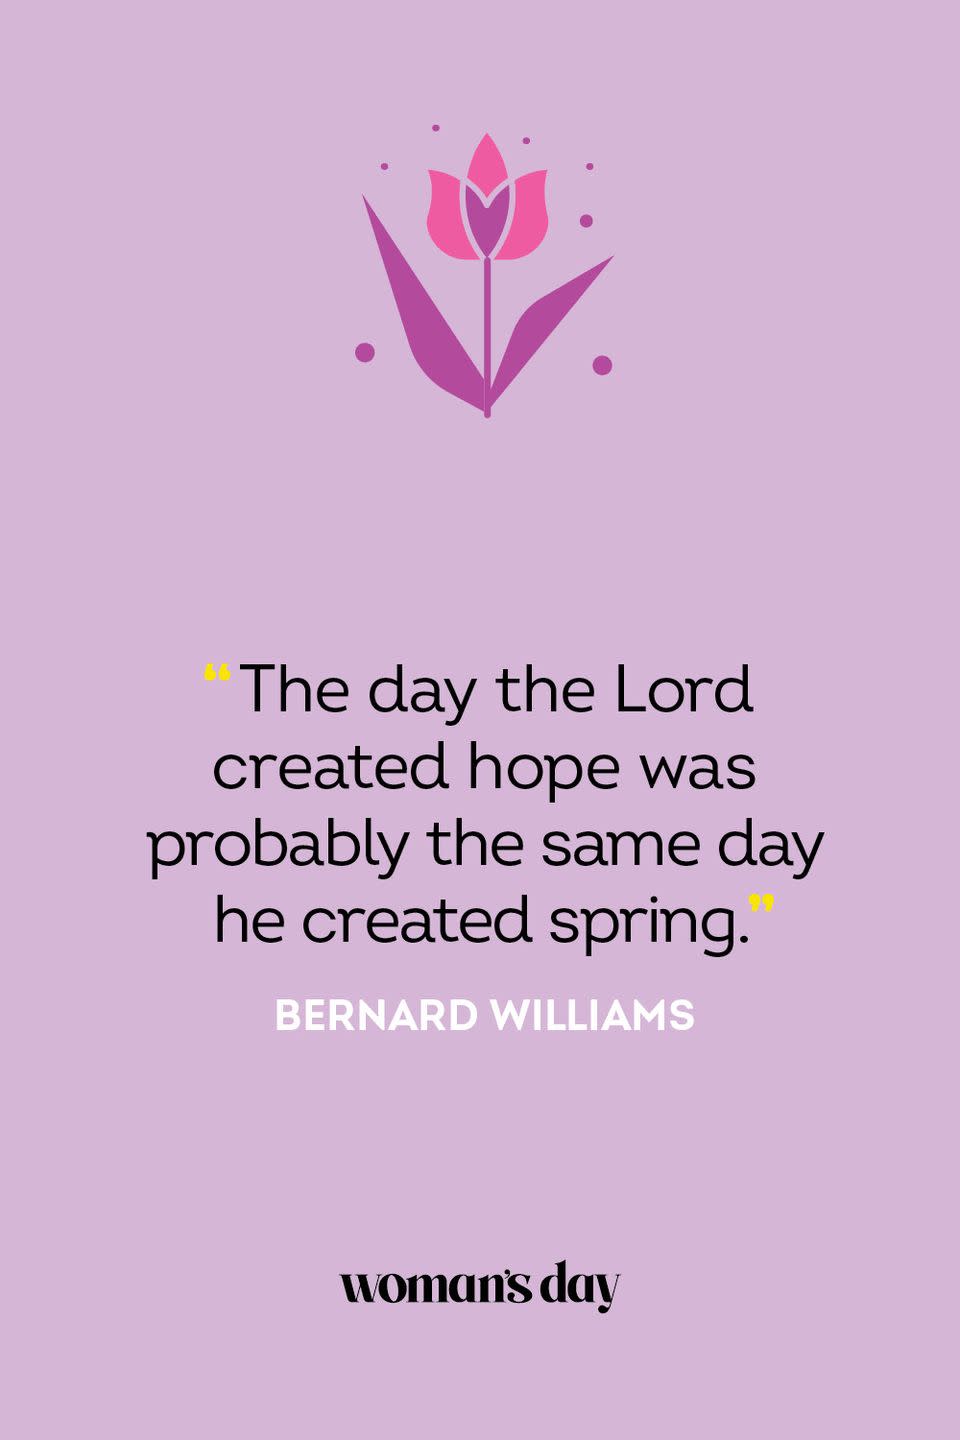 <p>"The day the Lord created hope was probably the same day he created spring." — Bernard Williams<br></p>